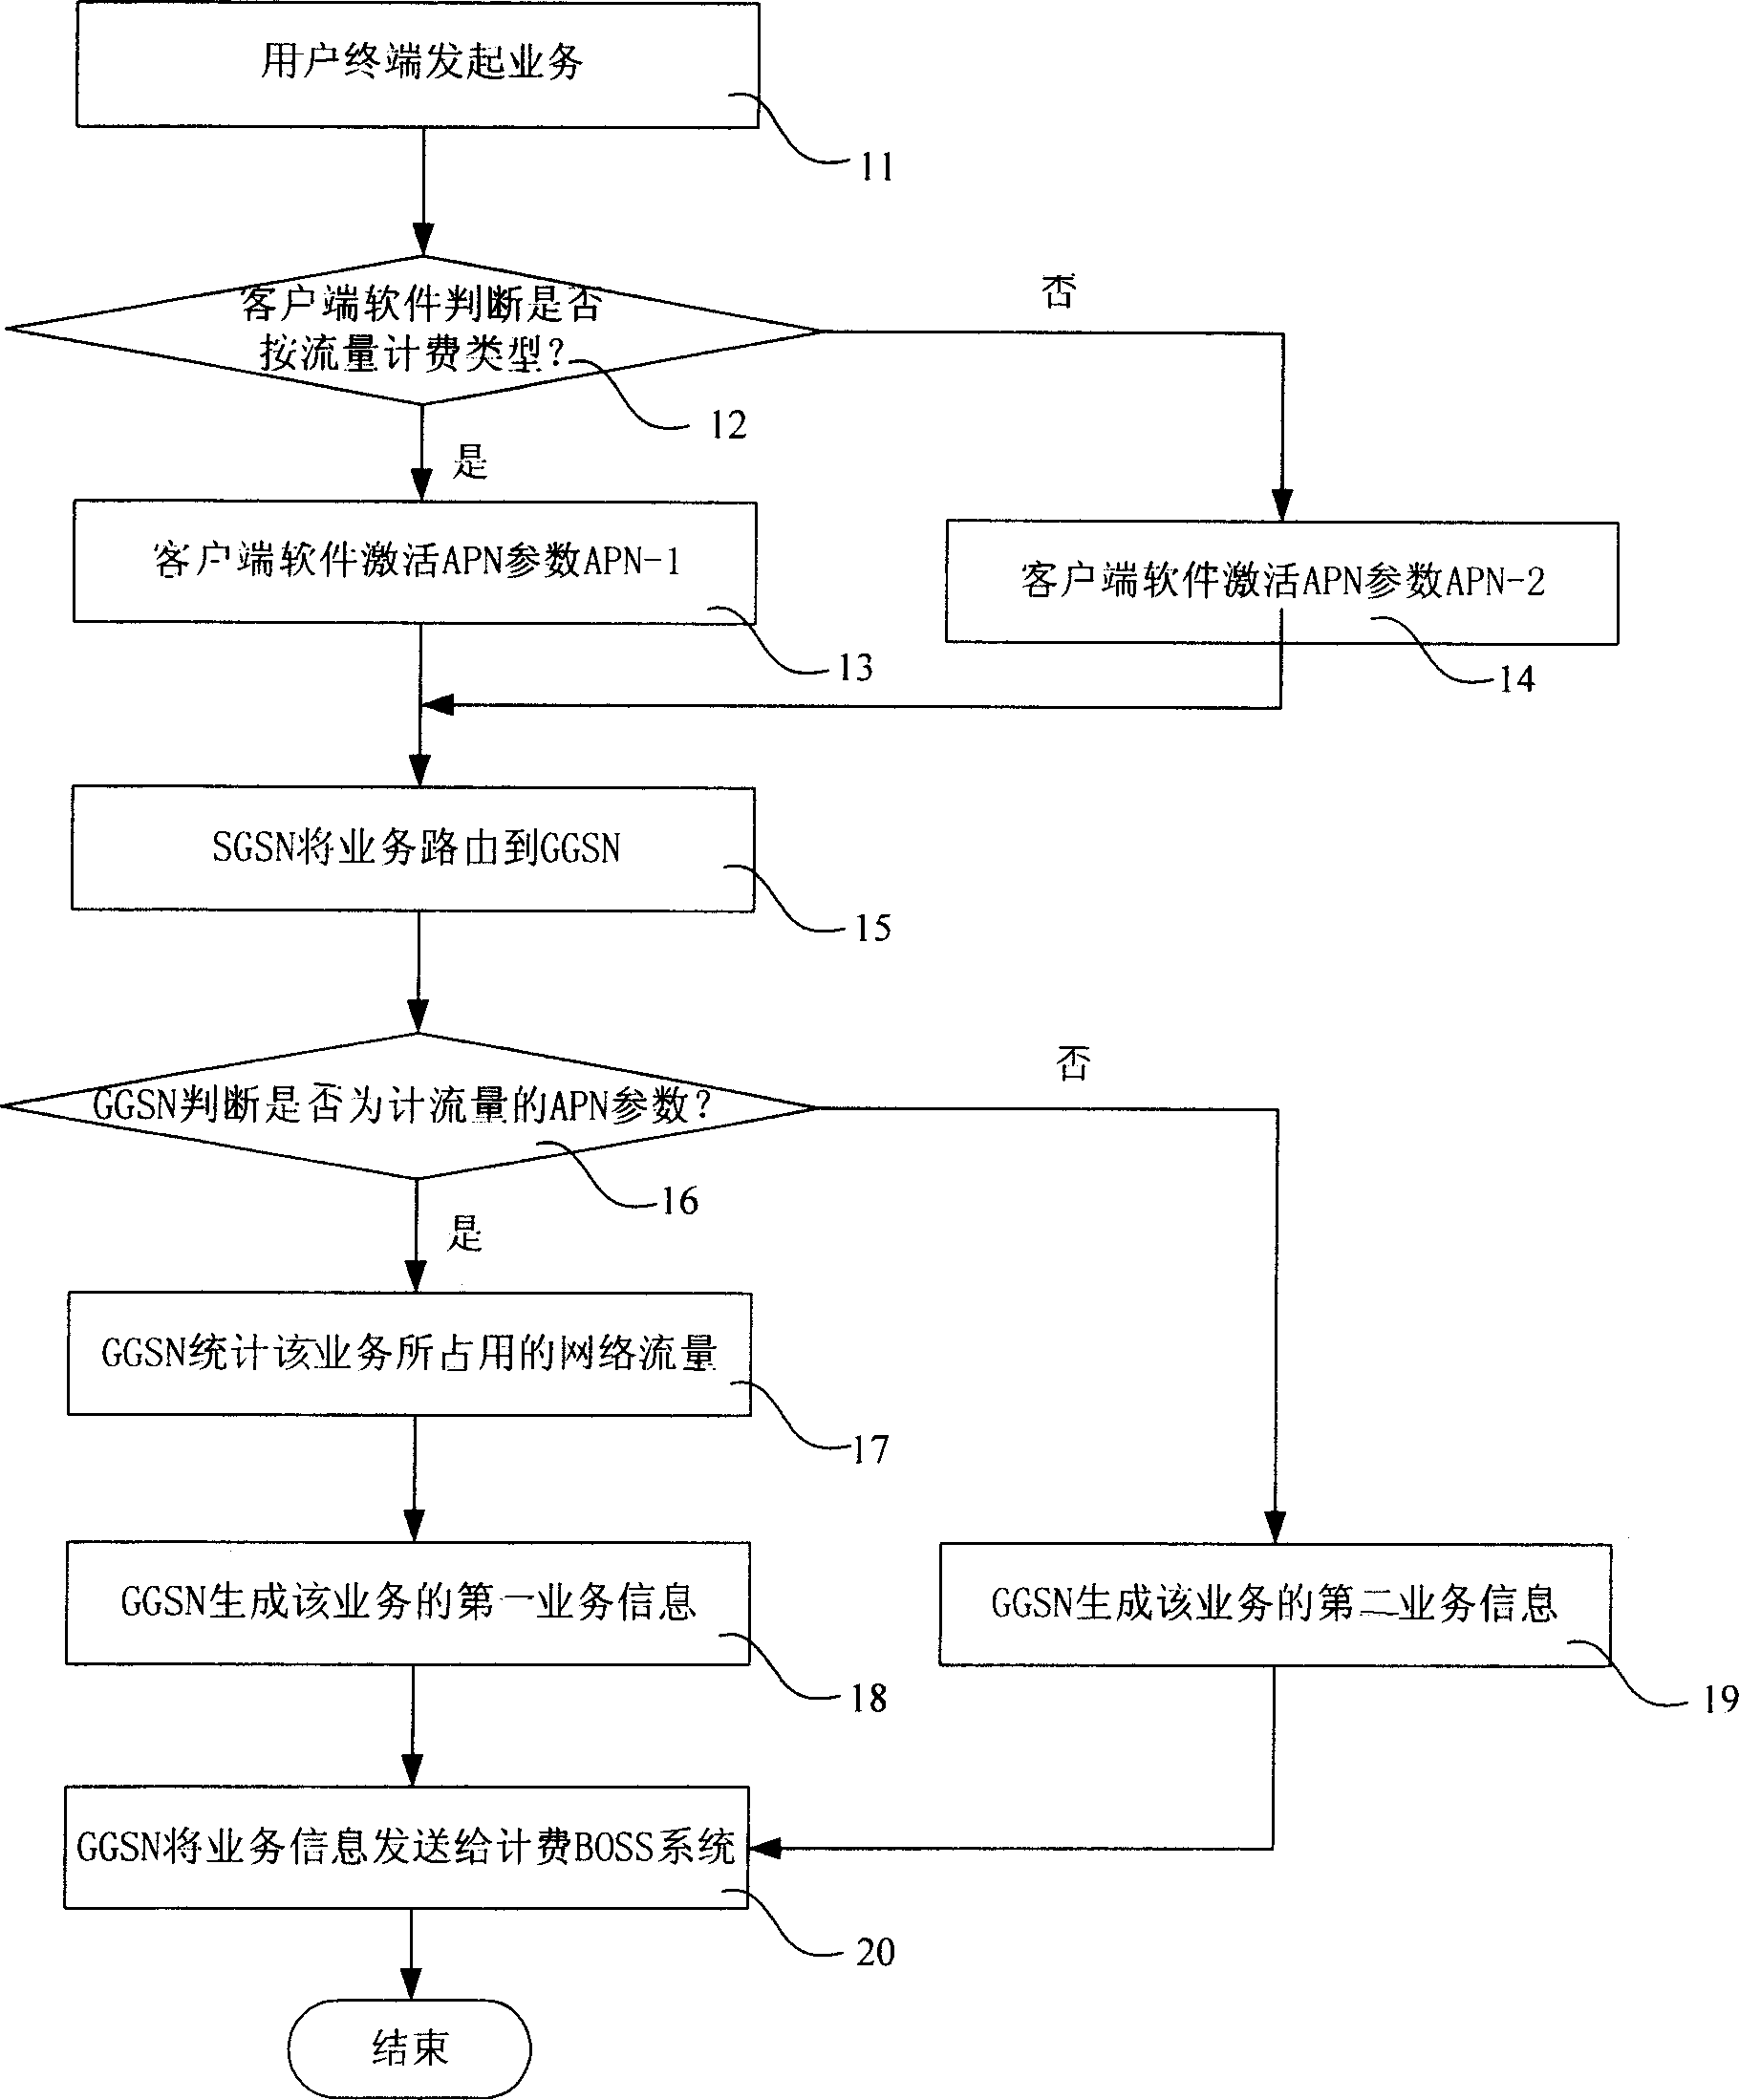 Method for realizing route by service charge type